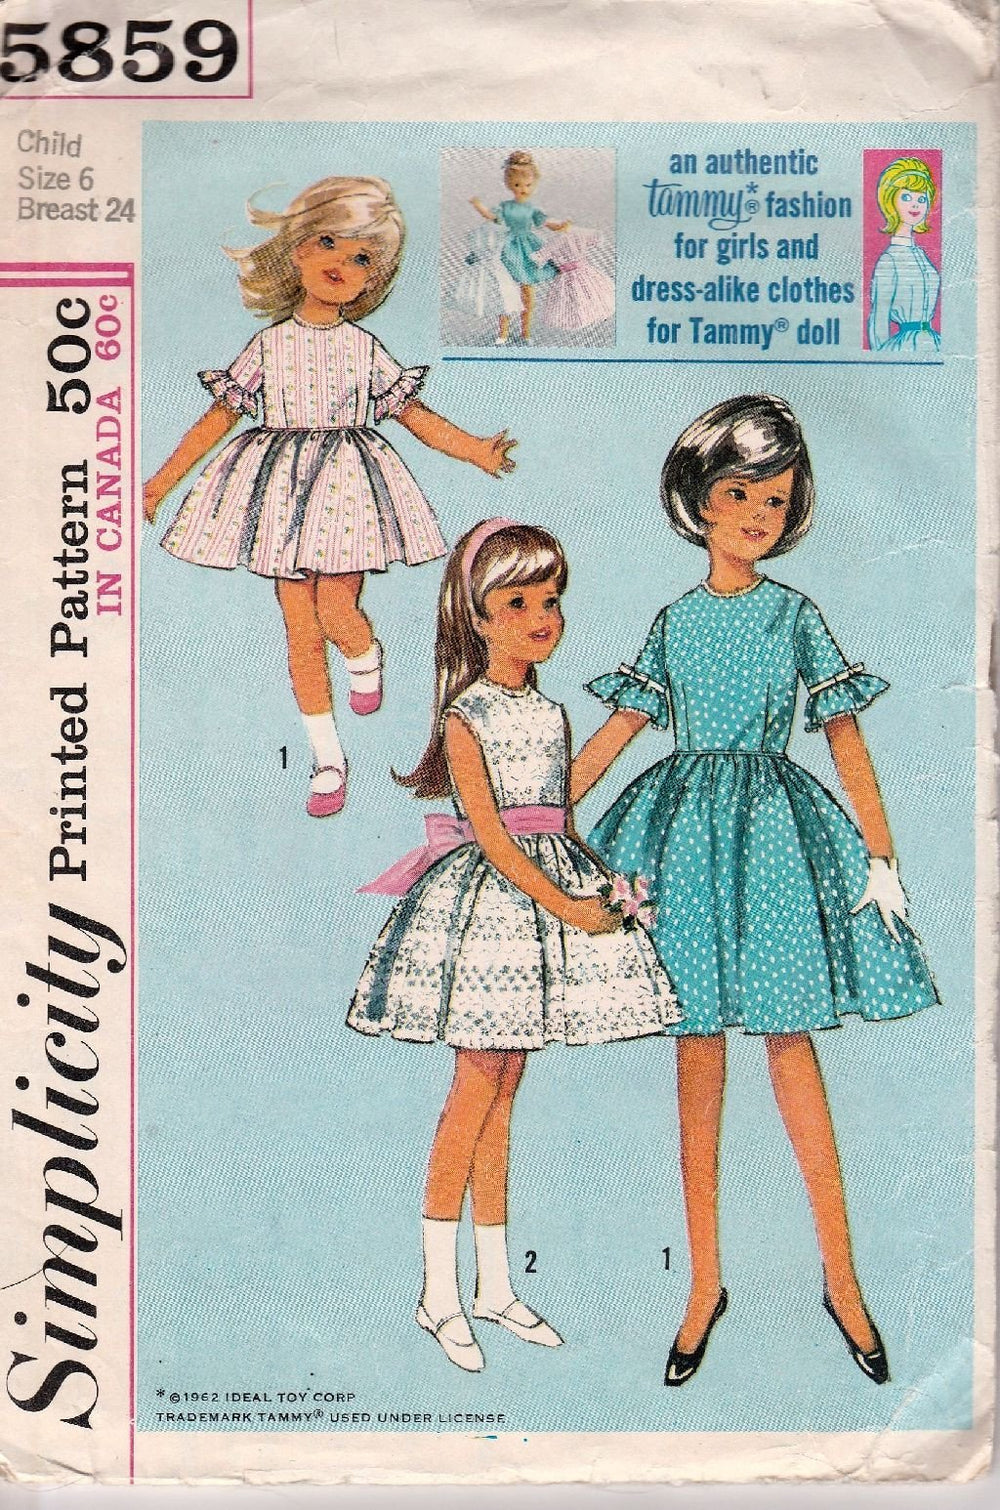 Simplicity 5859 Vintage Sewing Pattern 1960's Little Girls Full Skirt Dress Pleats Doll - VintageStitching - Vintage Sewing Patterns